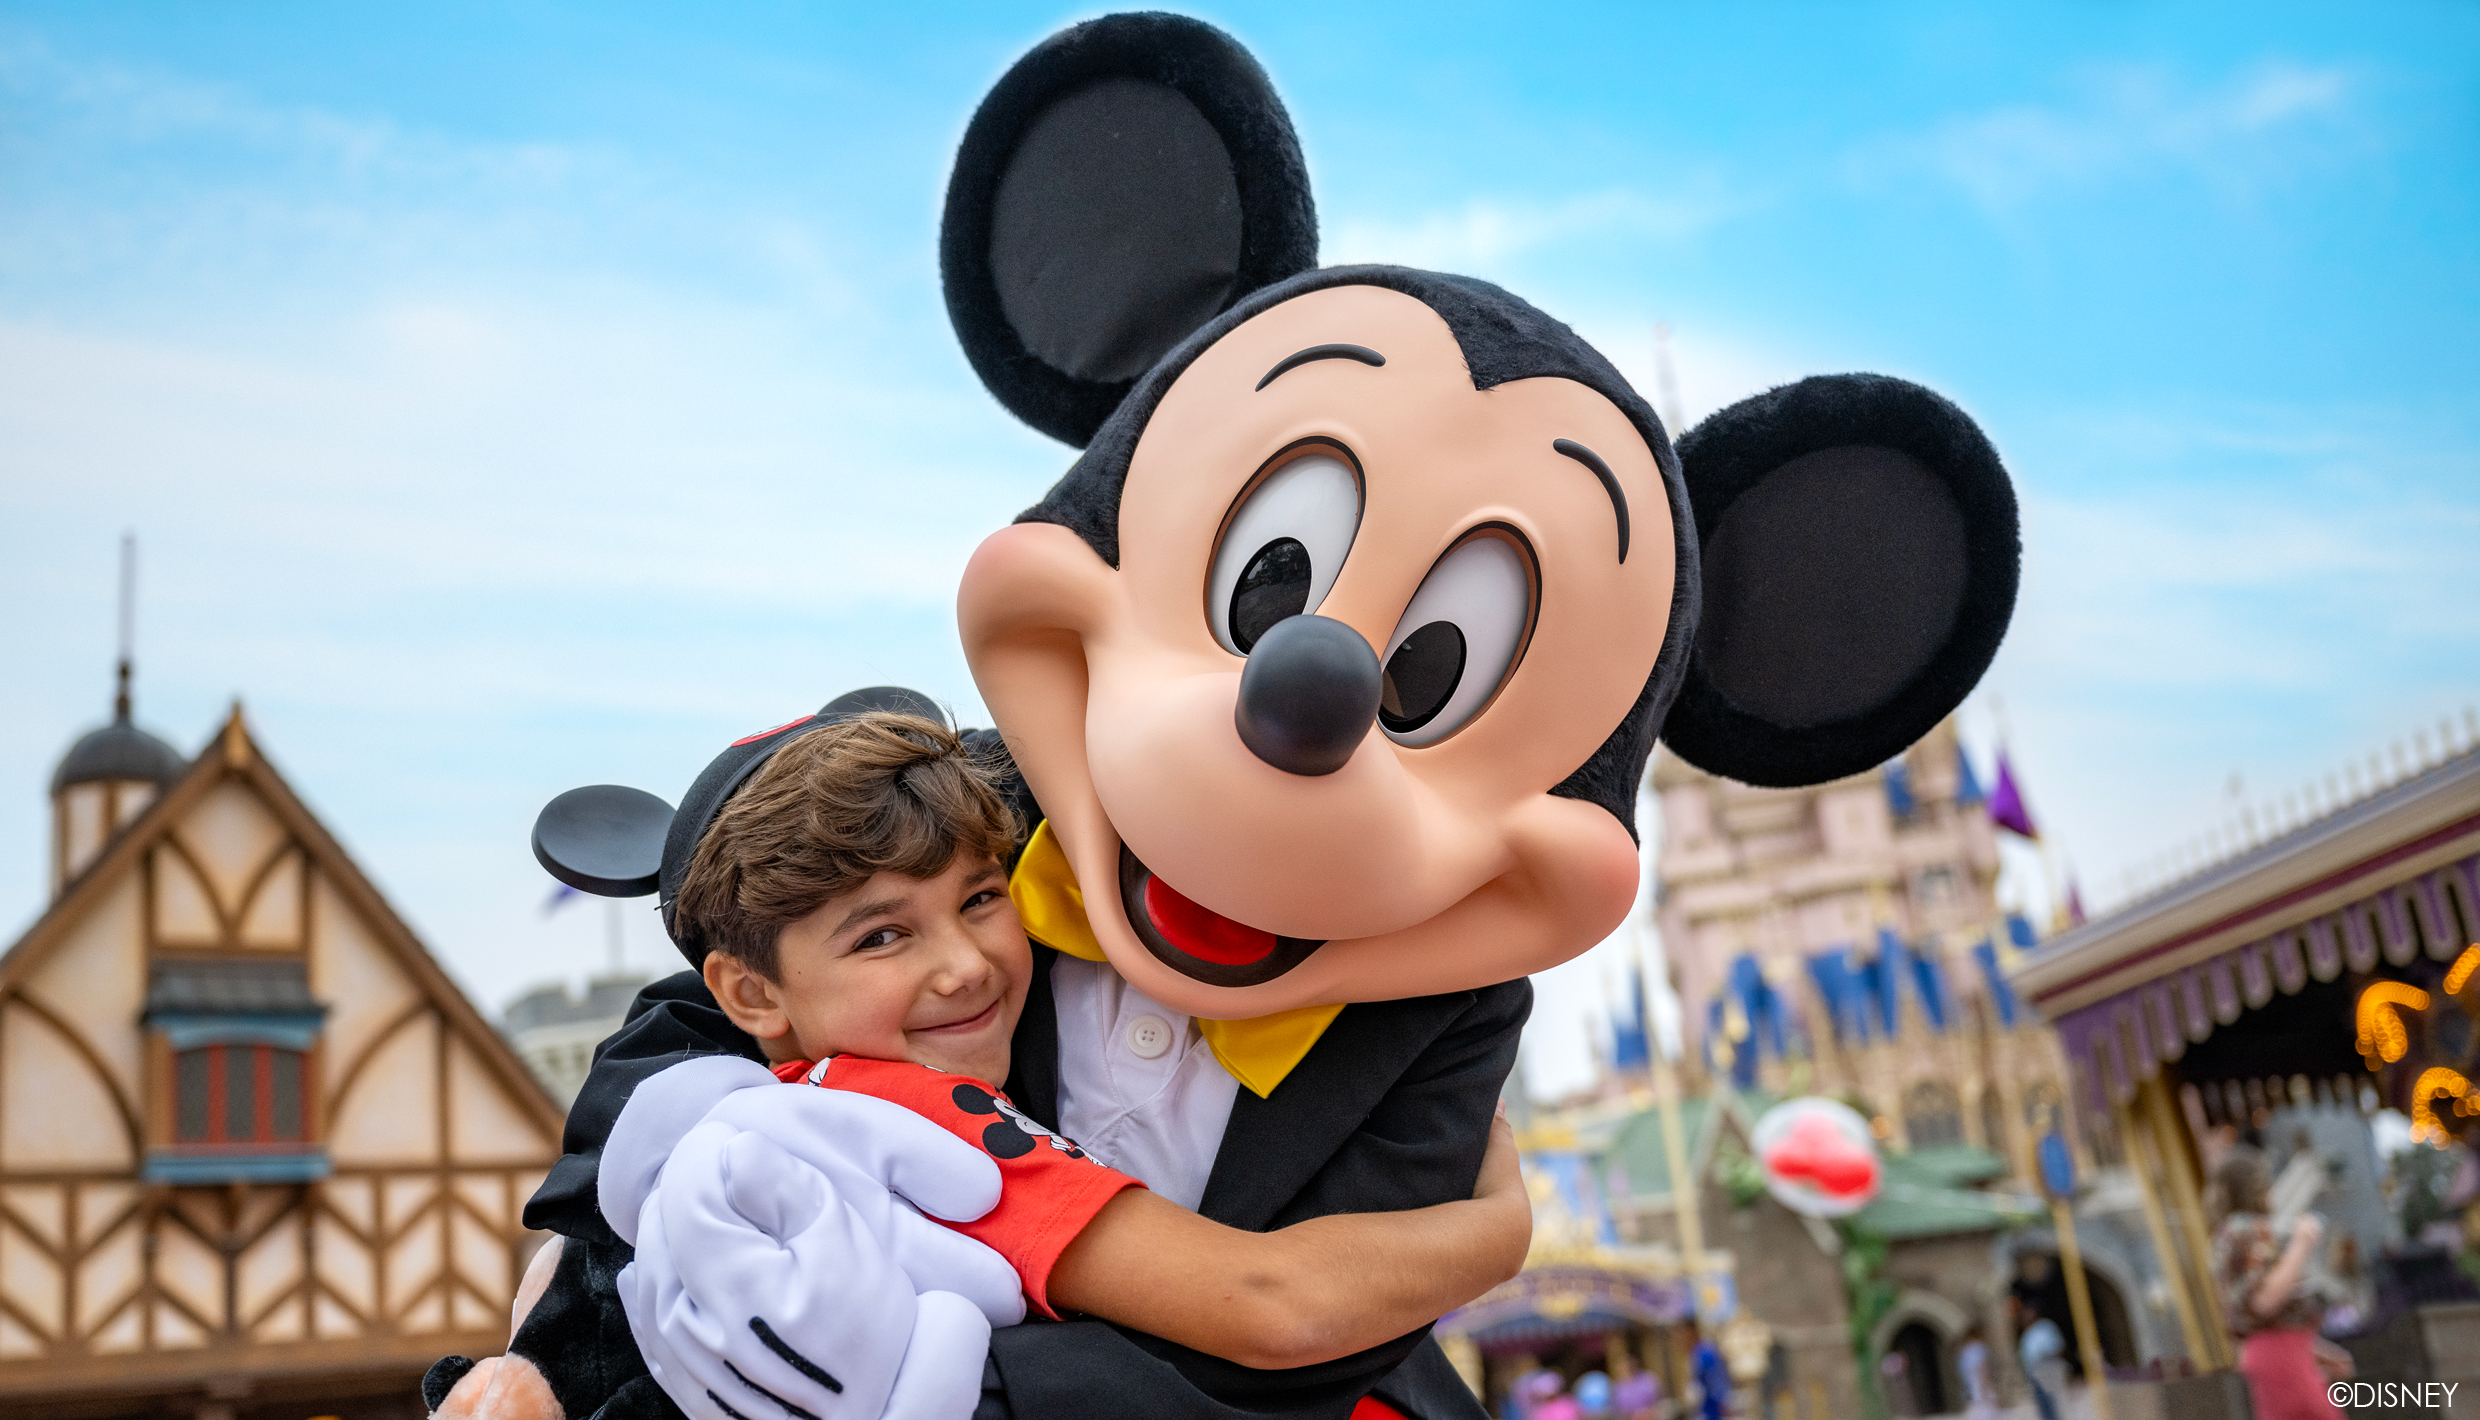 https://www.blue365deals.com/sites/default/files/styles/1240x710_cropped_2x/public/images/Blue365-WDW-Mickey-Image.png?h=febe9a9c&itok=sDCqbiyy